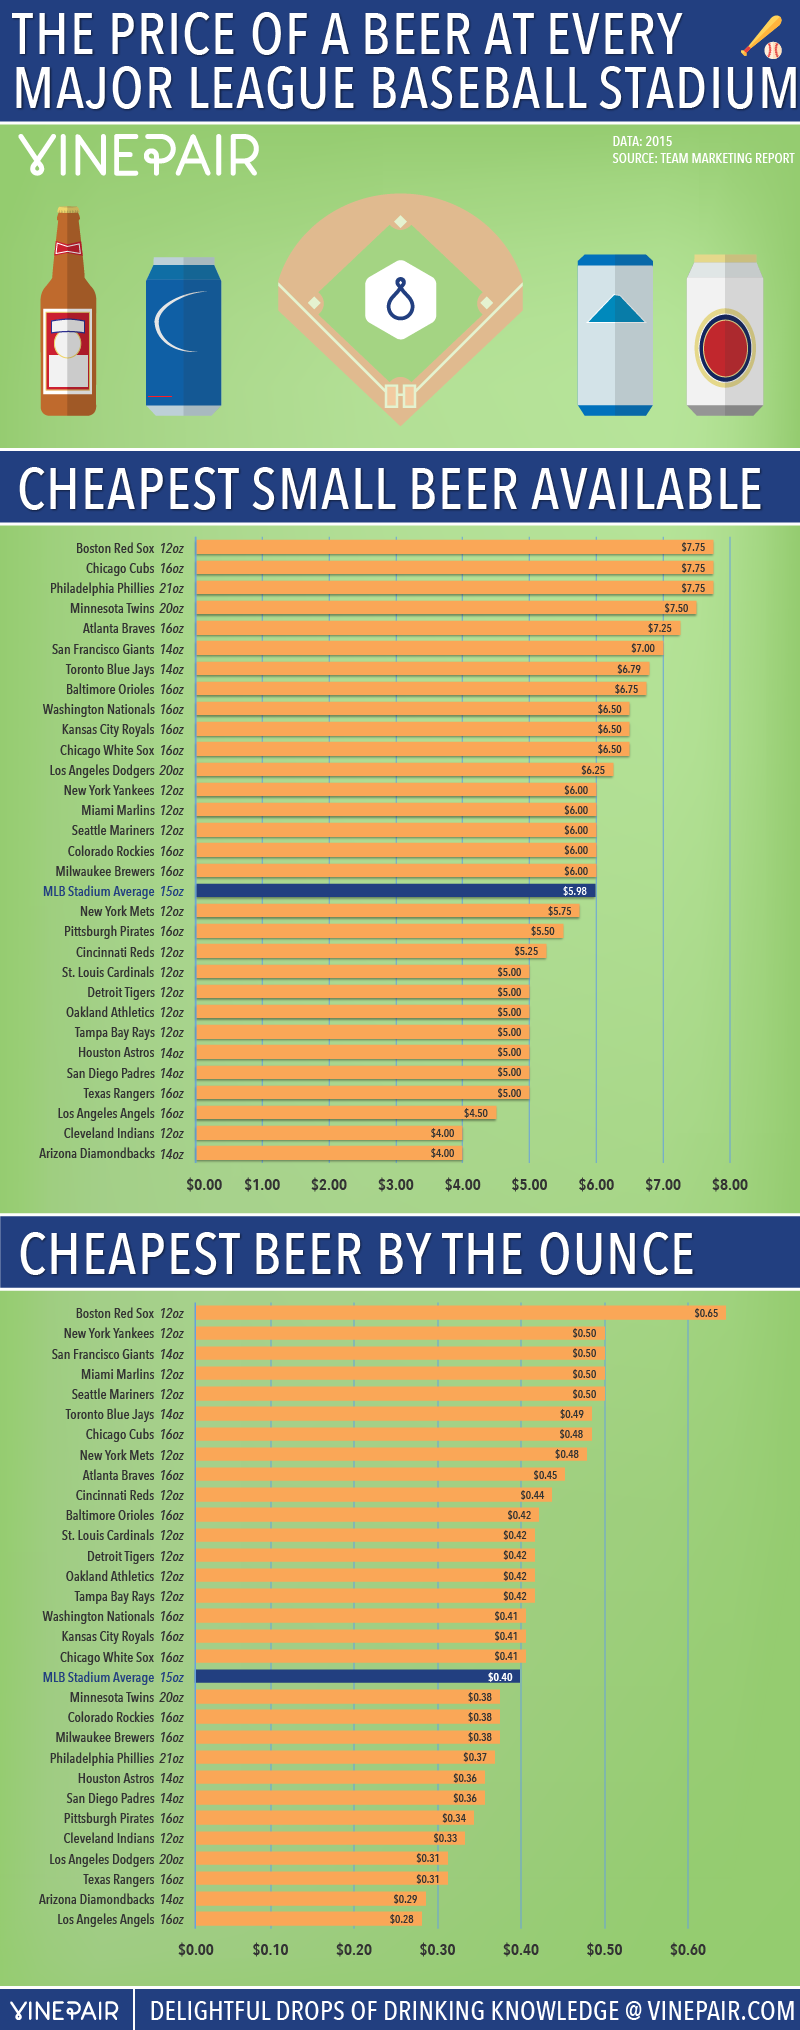 2015 Ranks: The Price Of A Beer At Every Major League Baseball Stadium